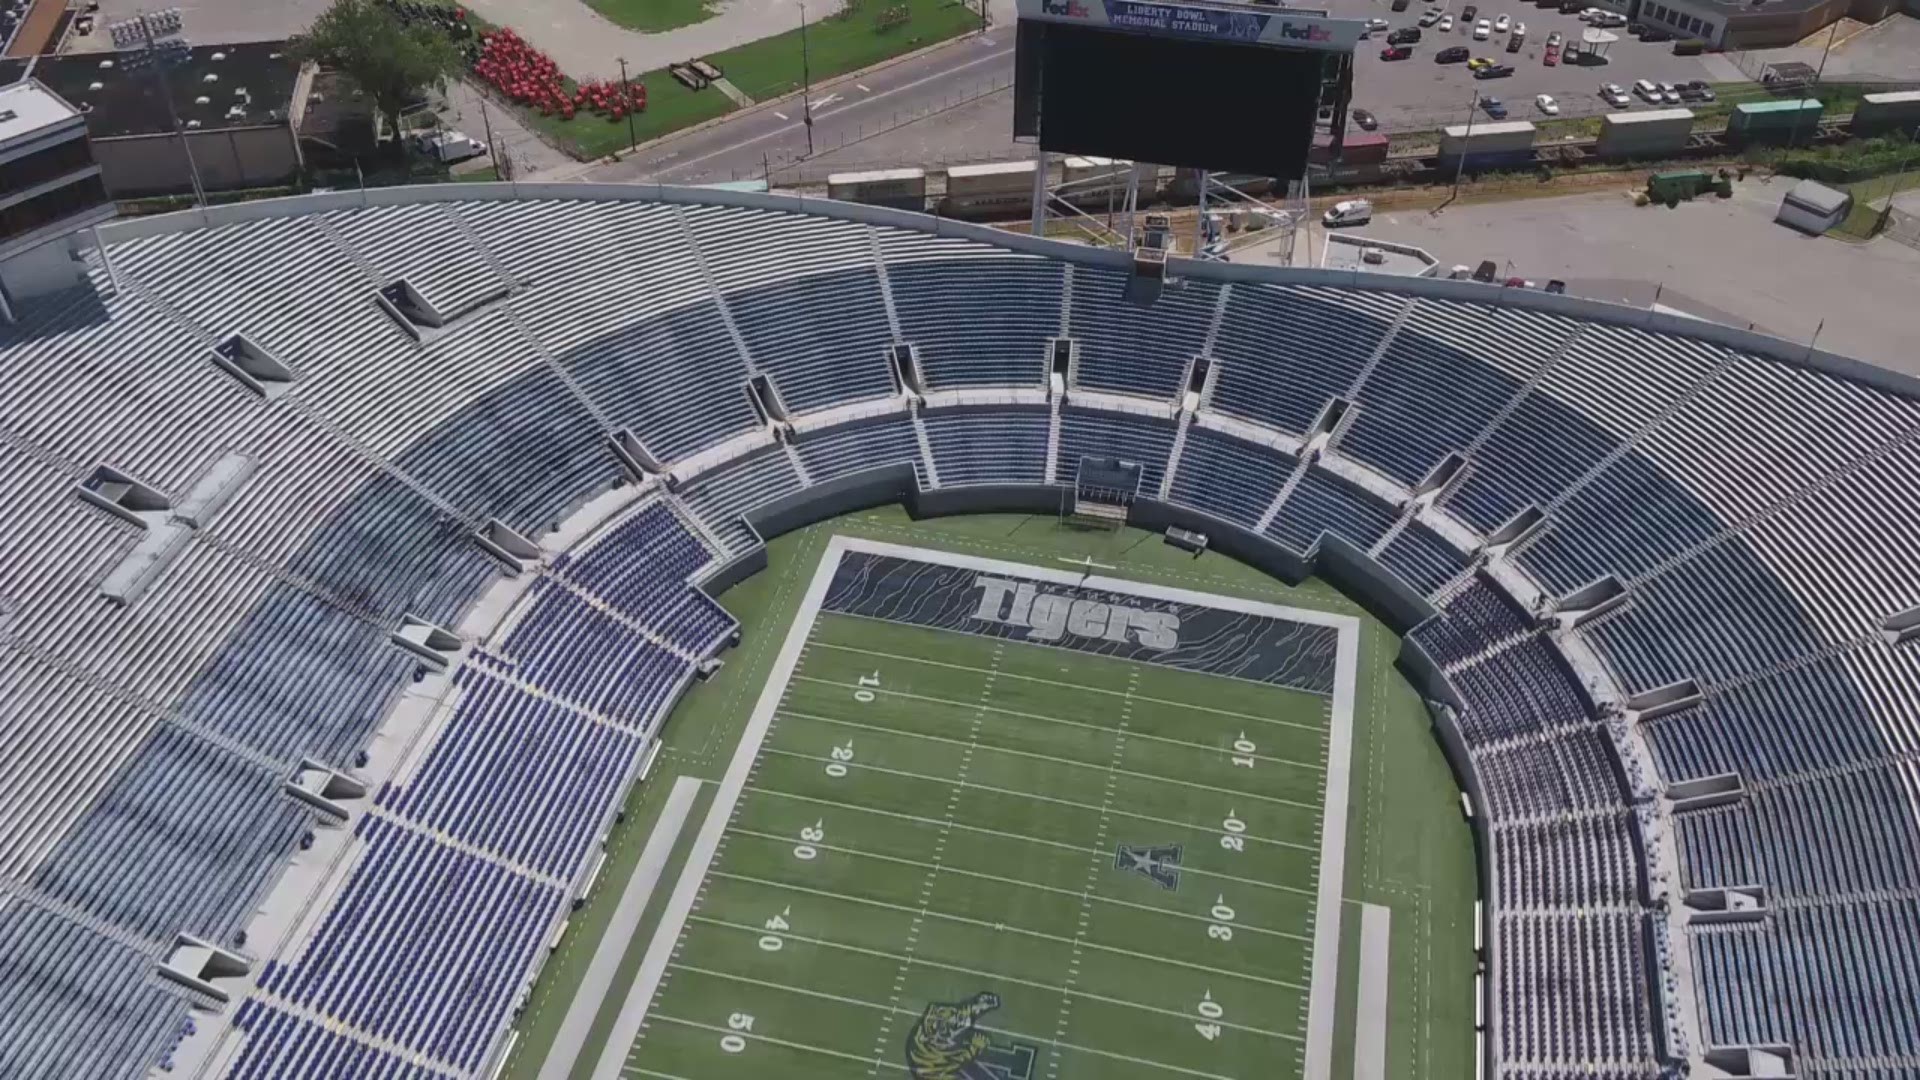 The University of Memphis announced a “12-foot social distancing seating model” for home football games in 2020 at Liberty Bowl Memorial Stadium